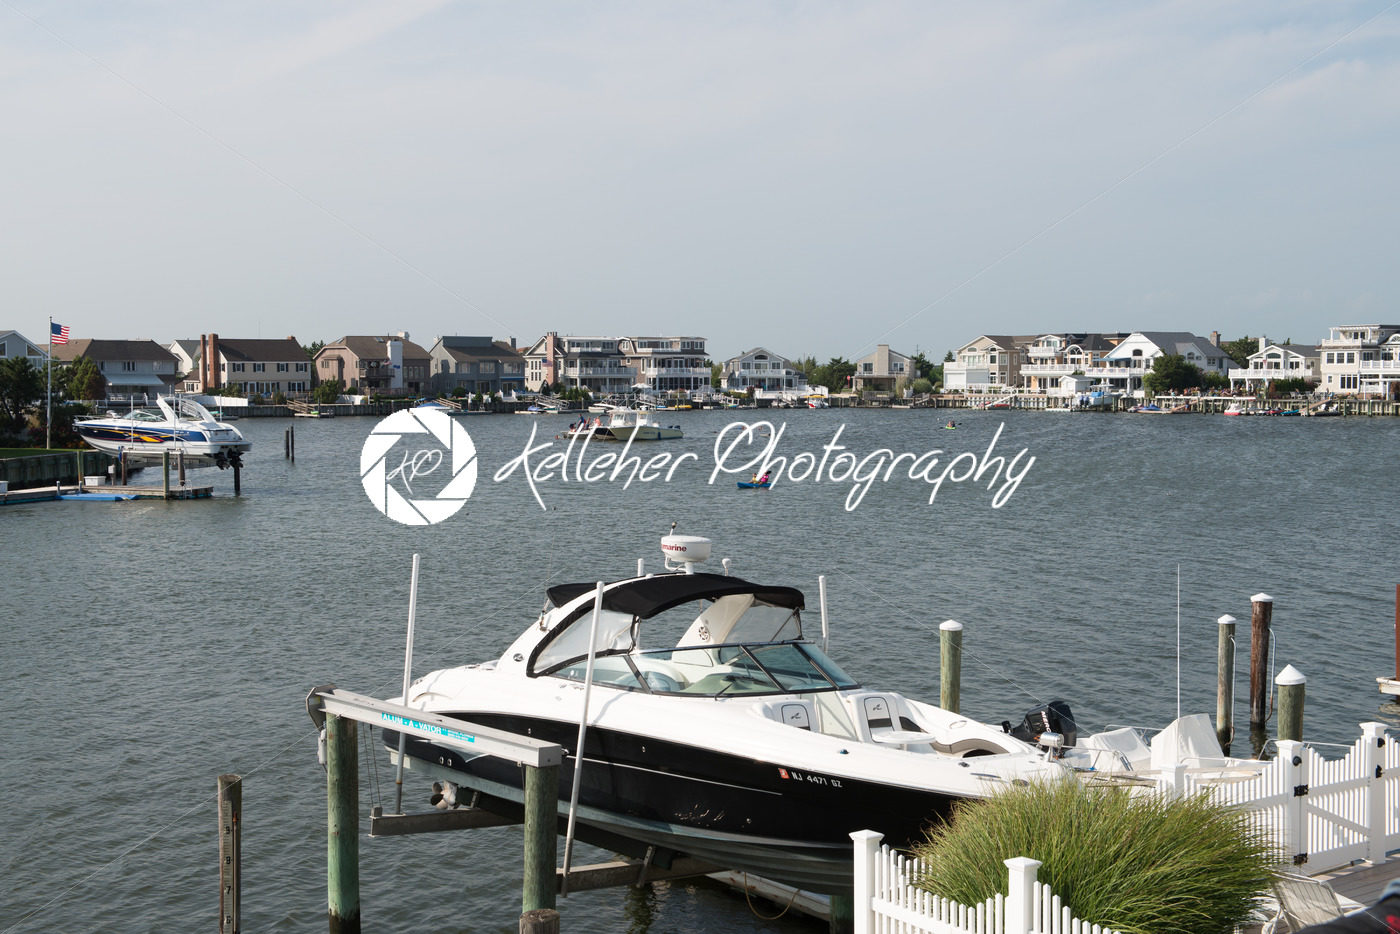 AVALON, NJ – AUGUST 30: Avalon Bay, beautiful bay with view of mansions and yachts on August 30, 2013 - Kelleher Photography Store